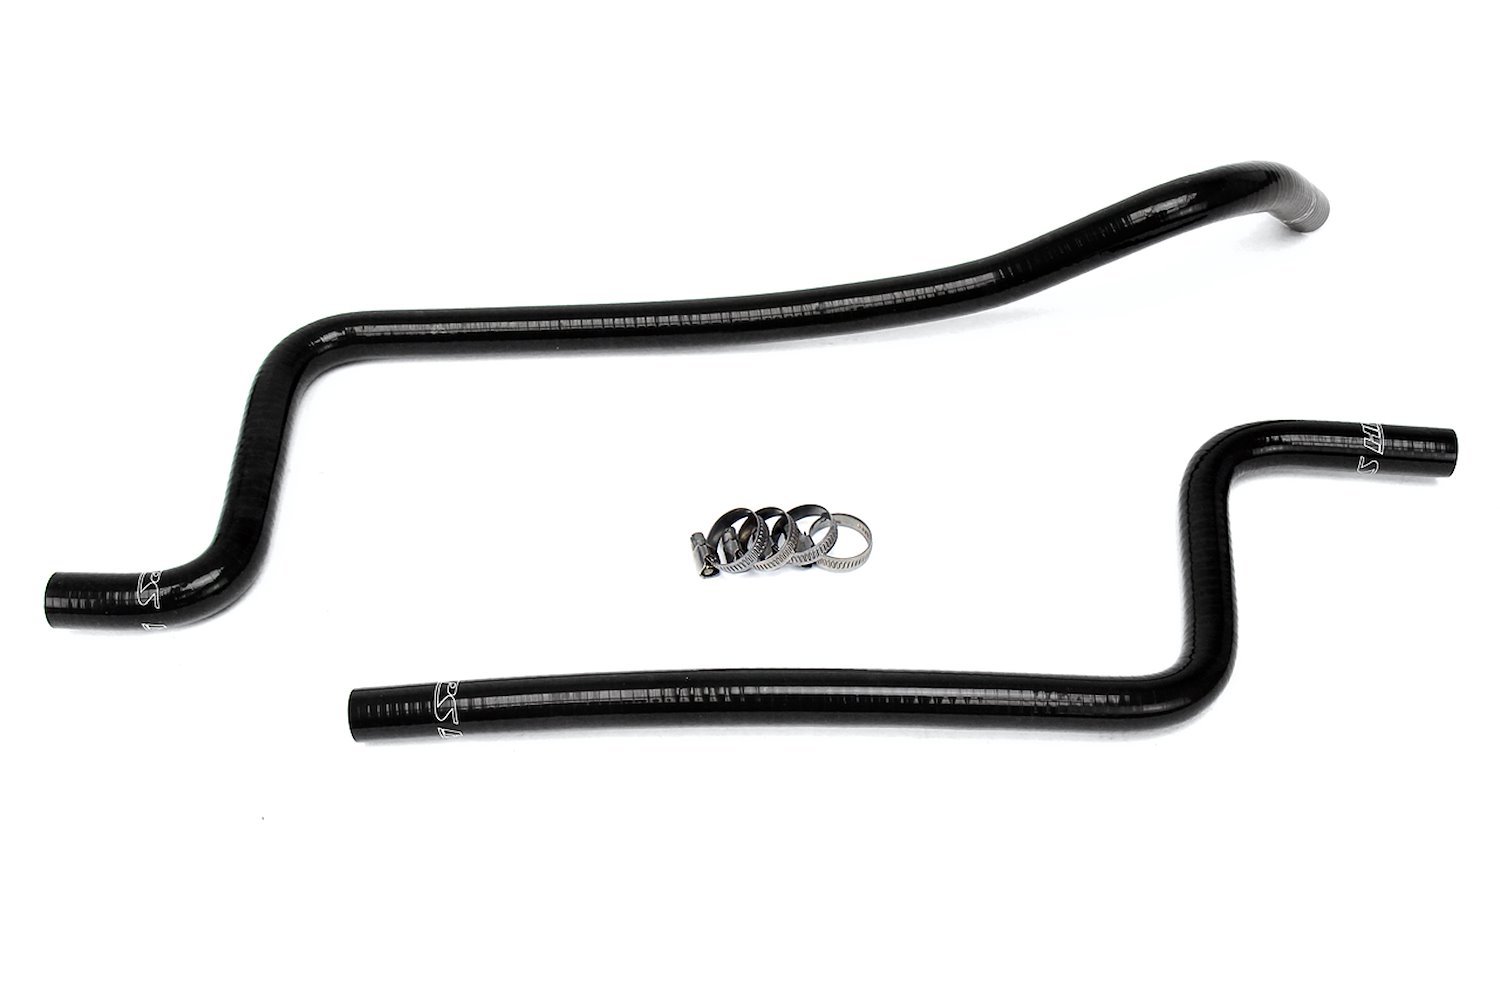 57-1221H-BLK Heater Hose Kit, High-Temp 3-Ply Reinforced Silicone, Replace OEM Rubber Heater Coolant Hoses